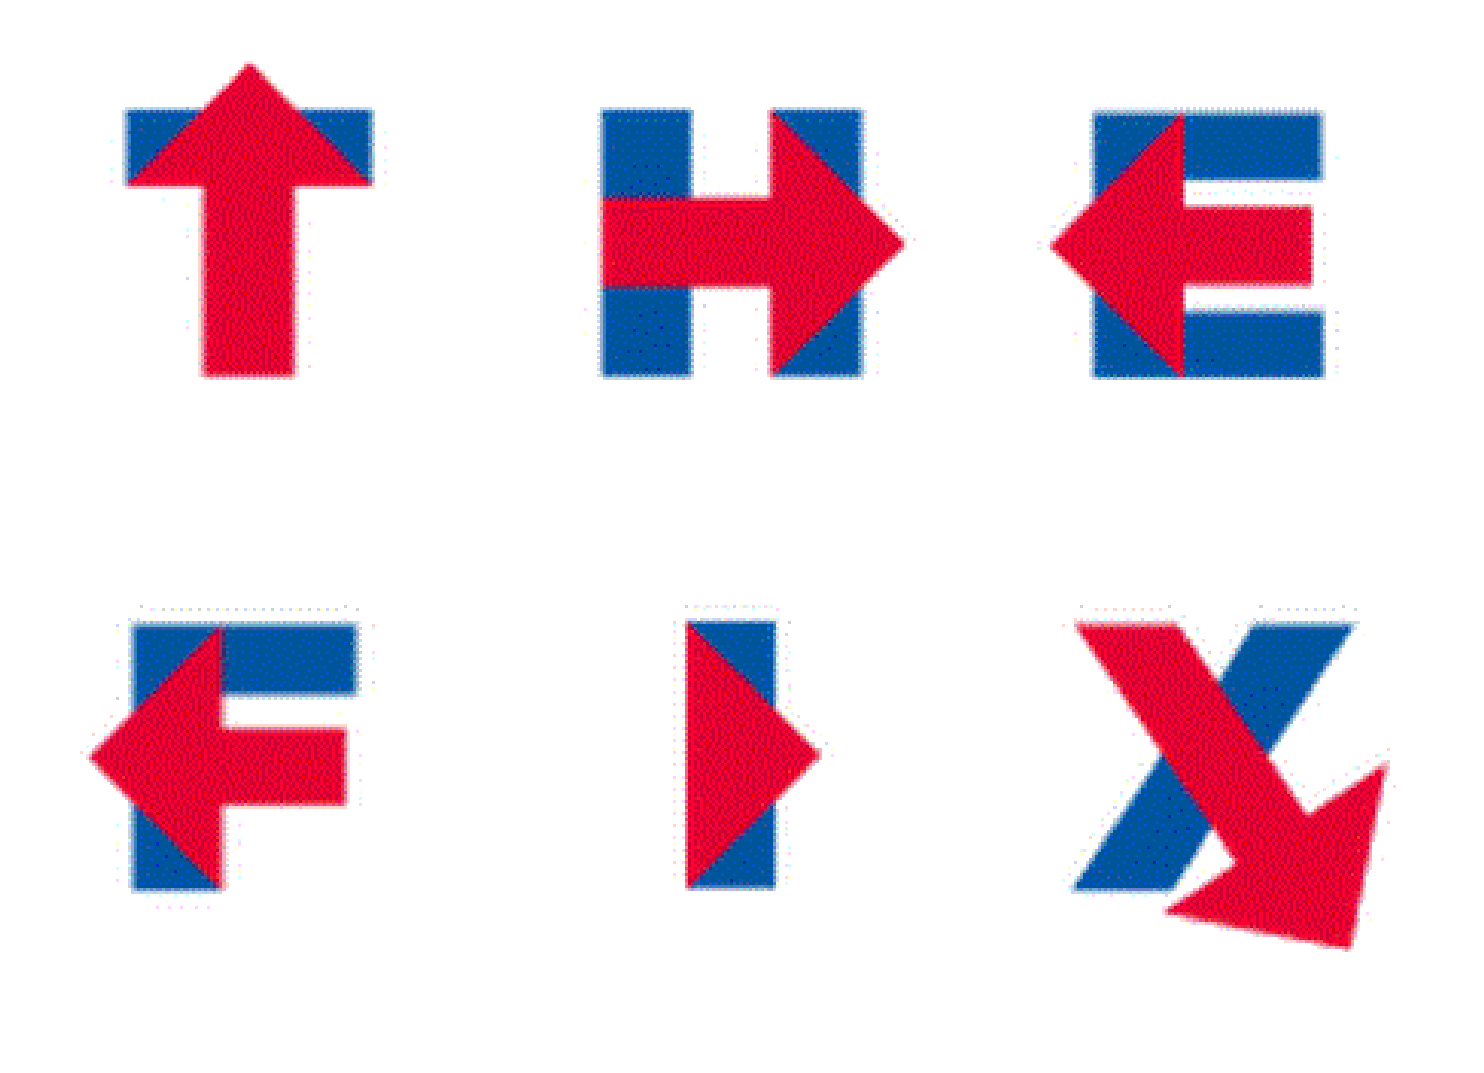 Clinton Maroons Logo - Create your own Hillary Clinton slogan, using her 'H' typeface ...